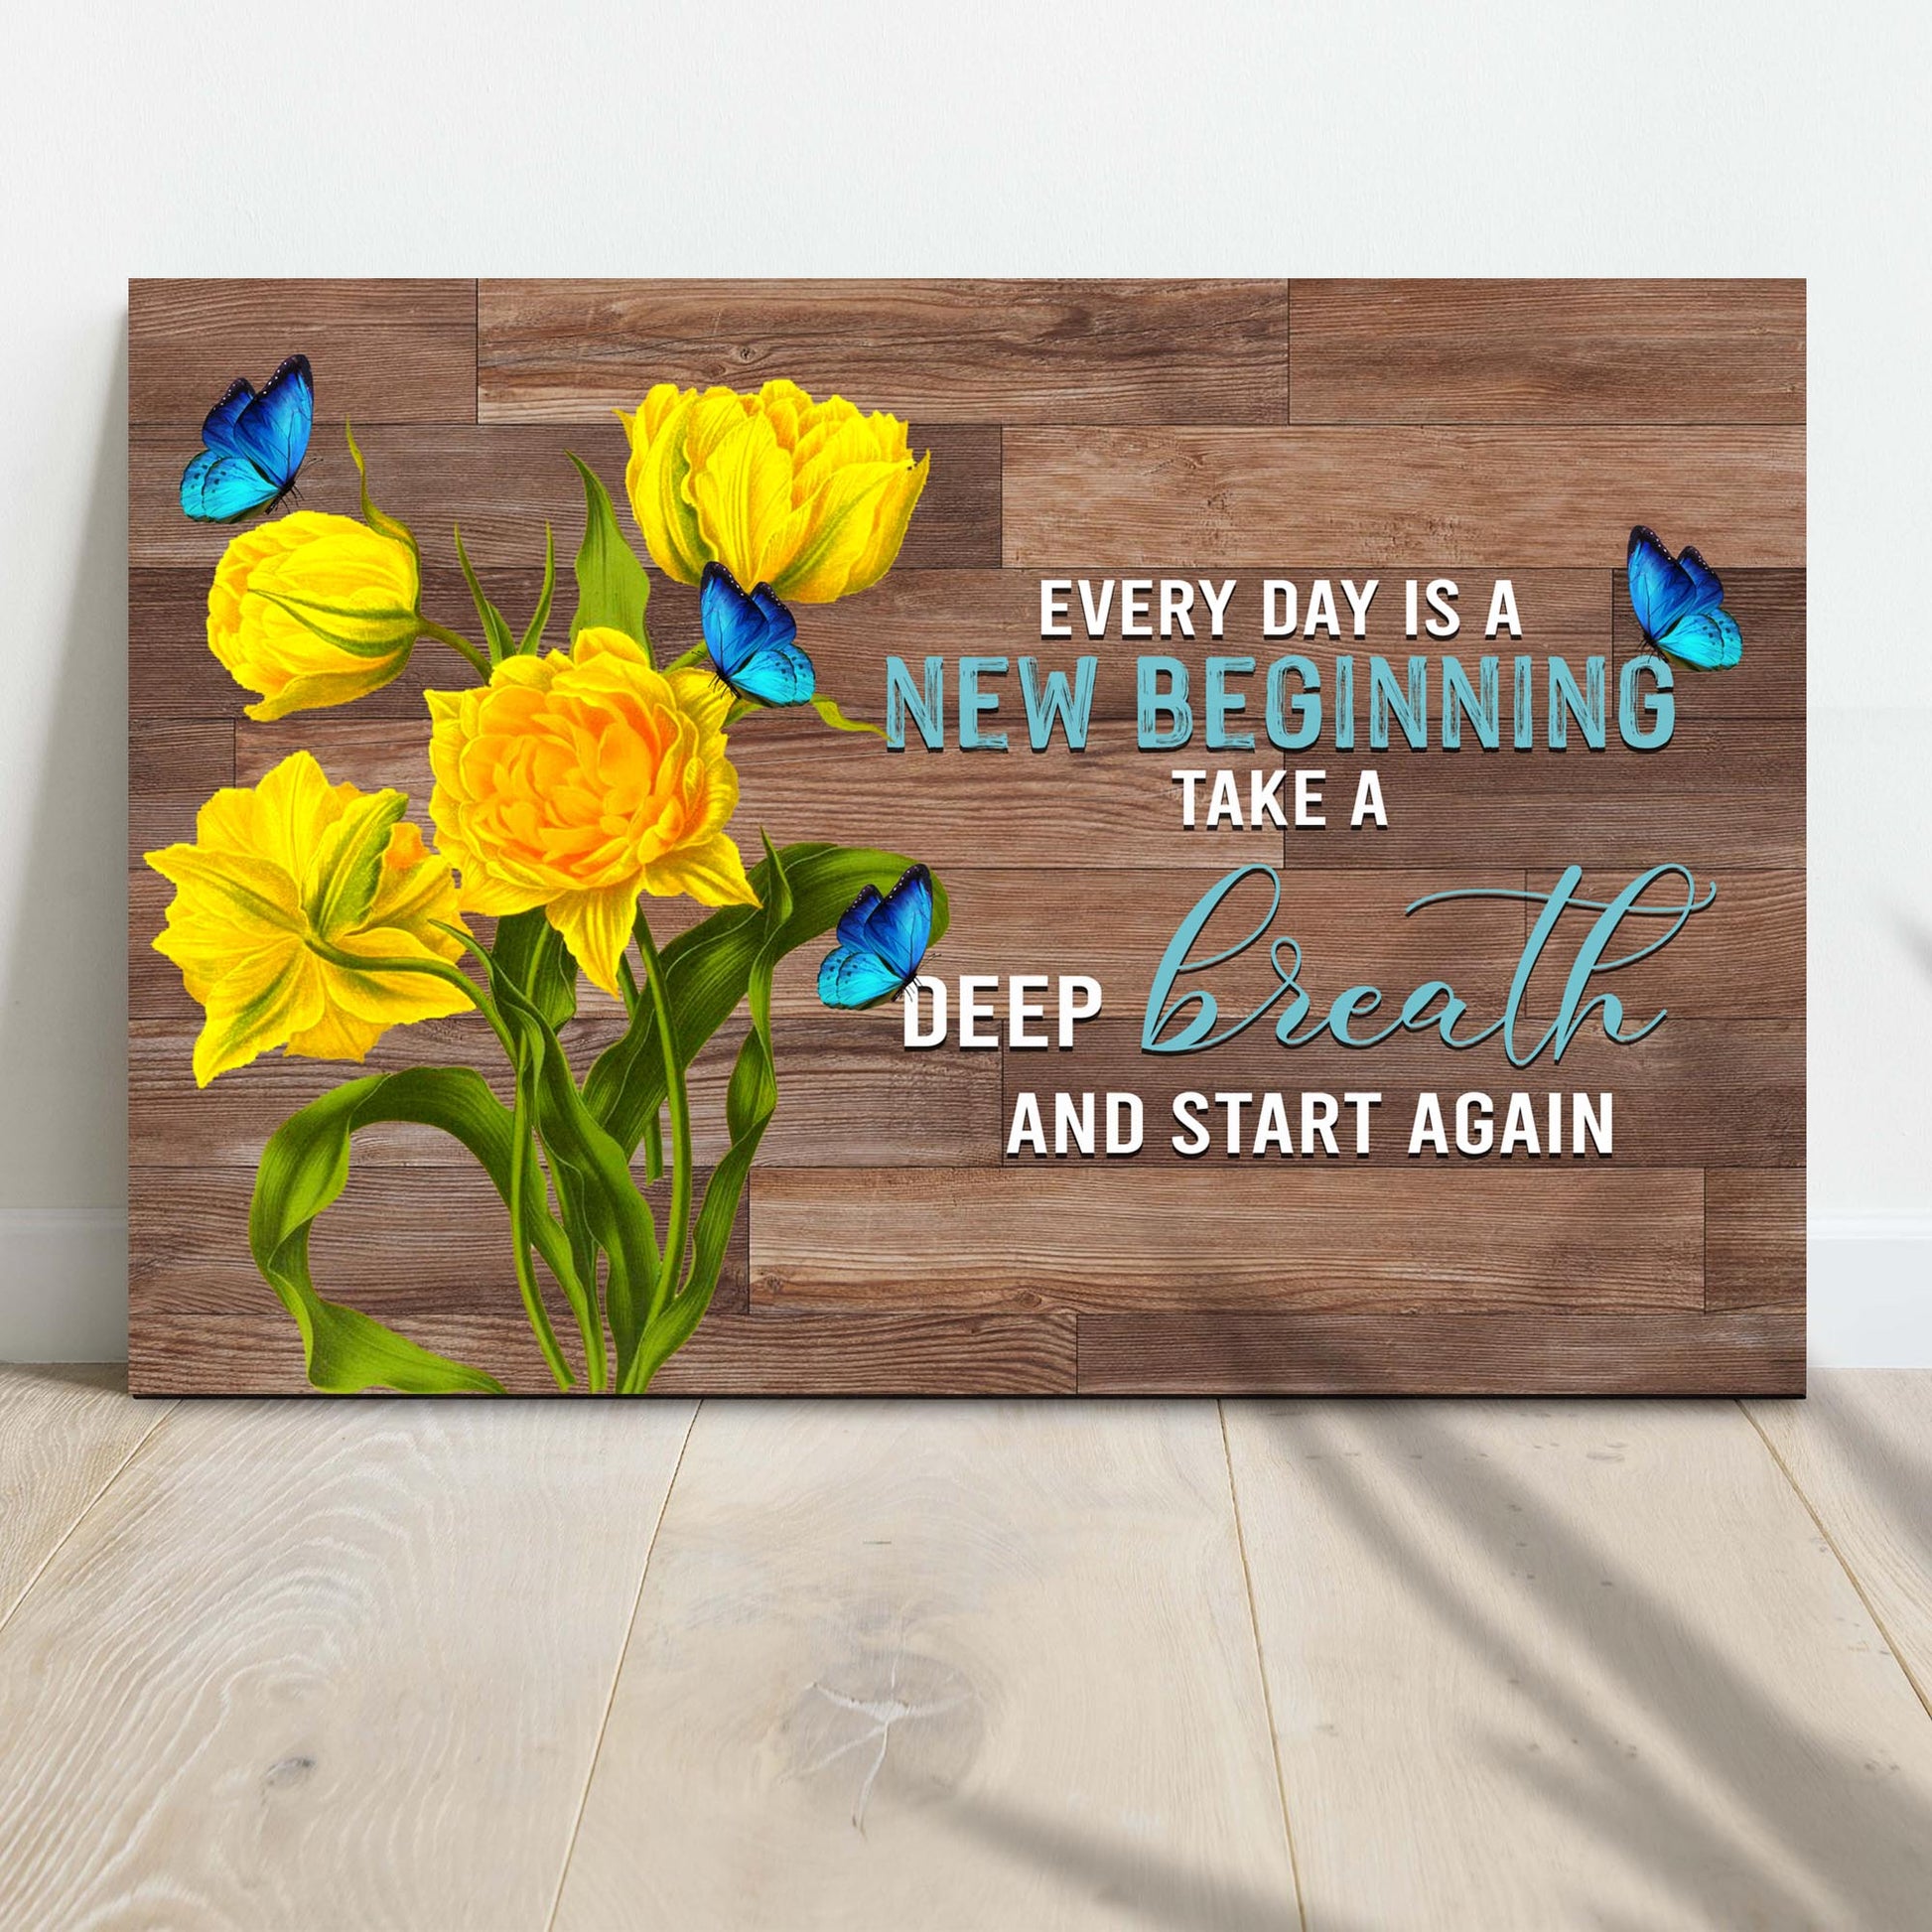 Everyday Is A New Beginning Sign II - Image by Tailored Canvases